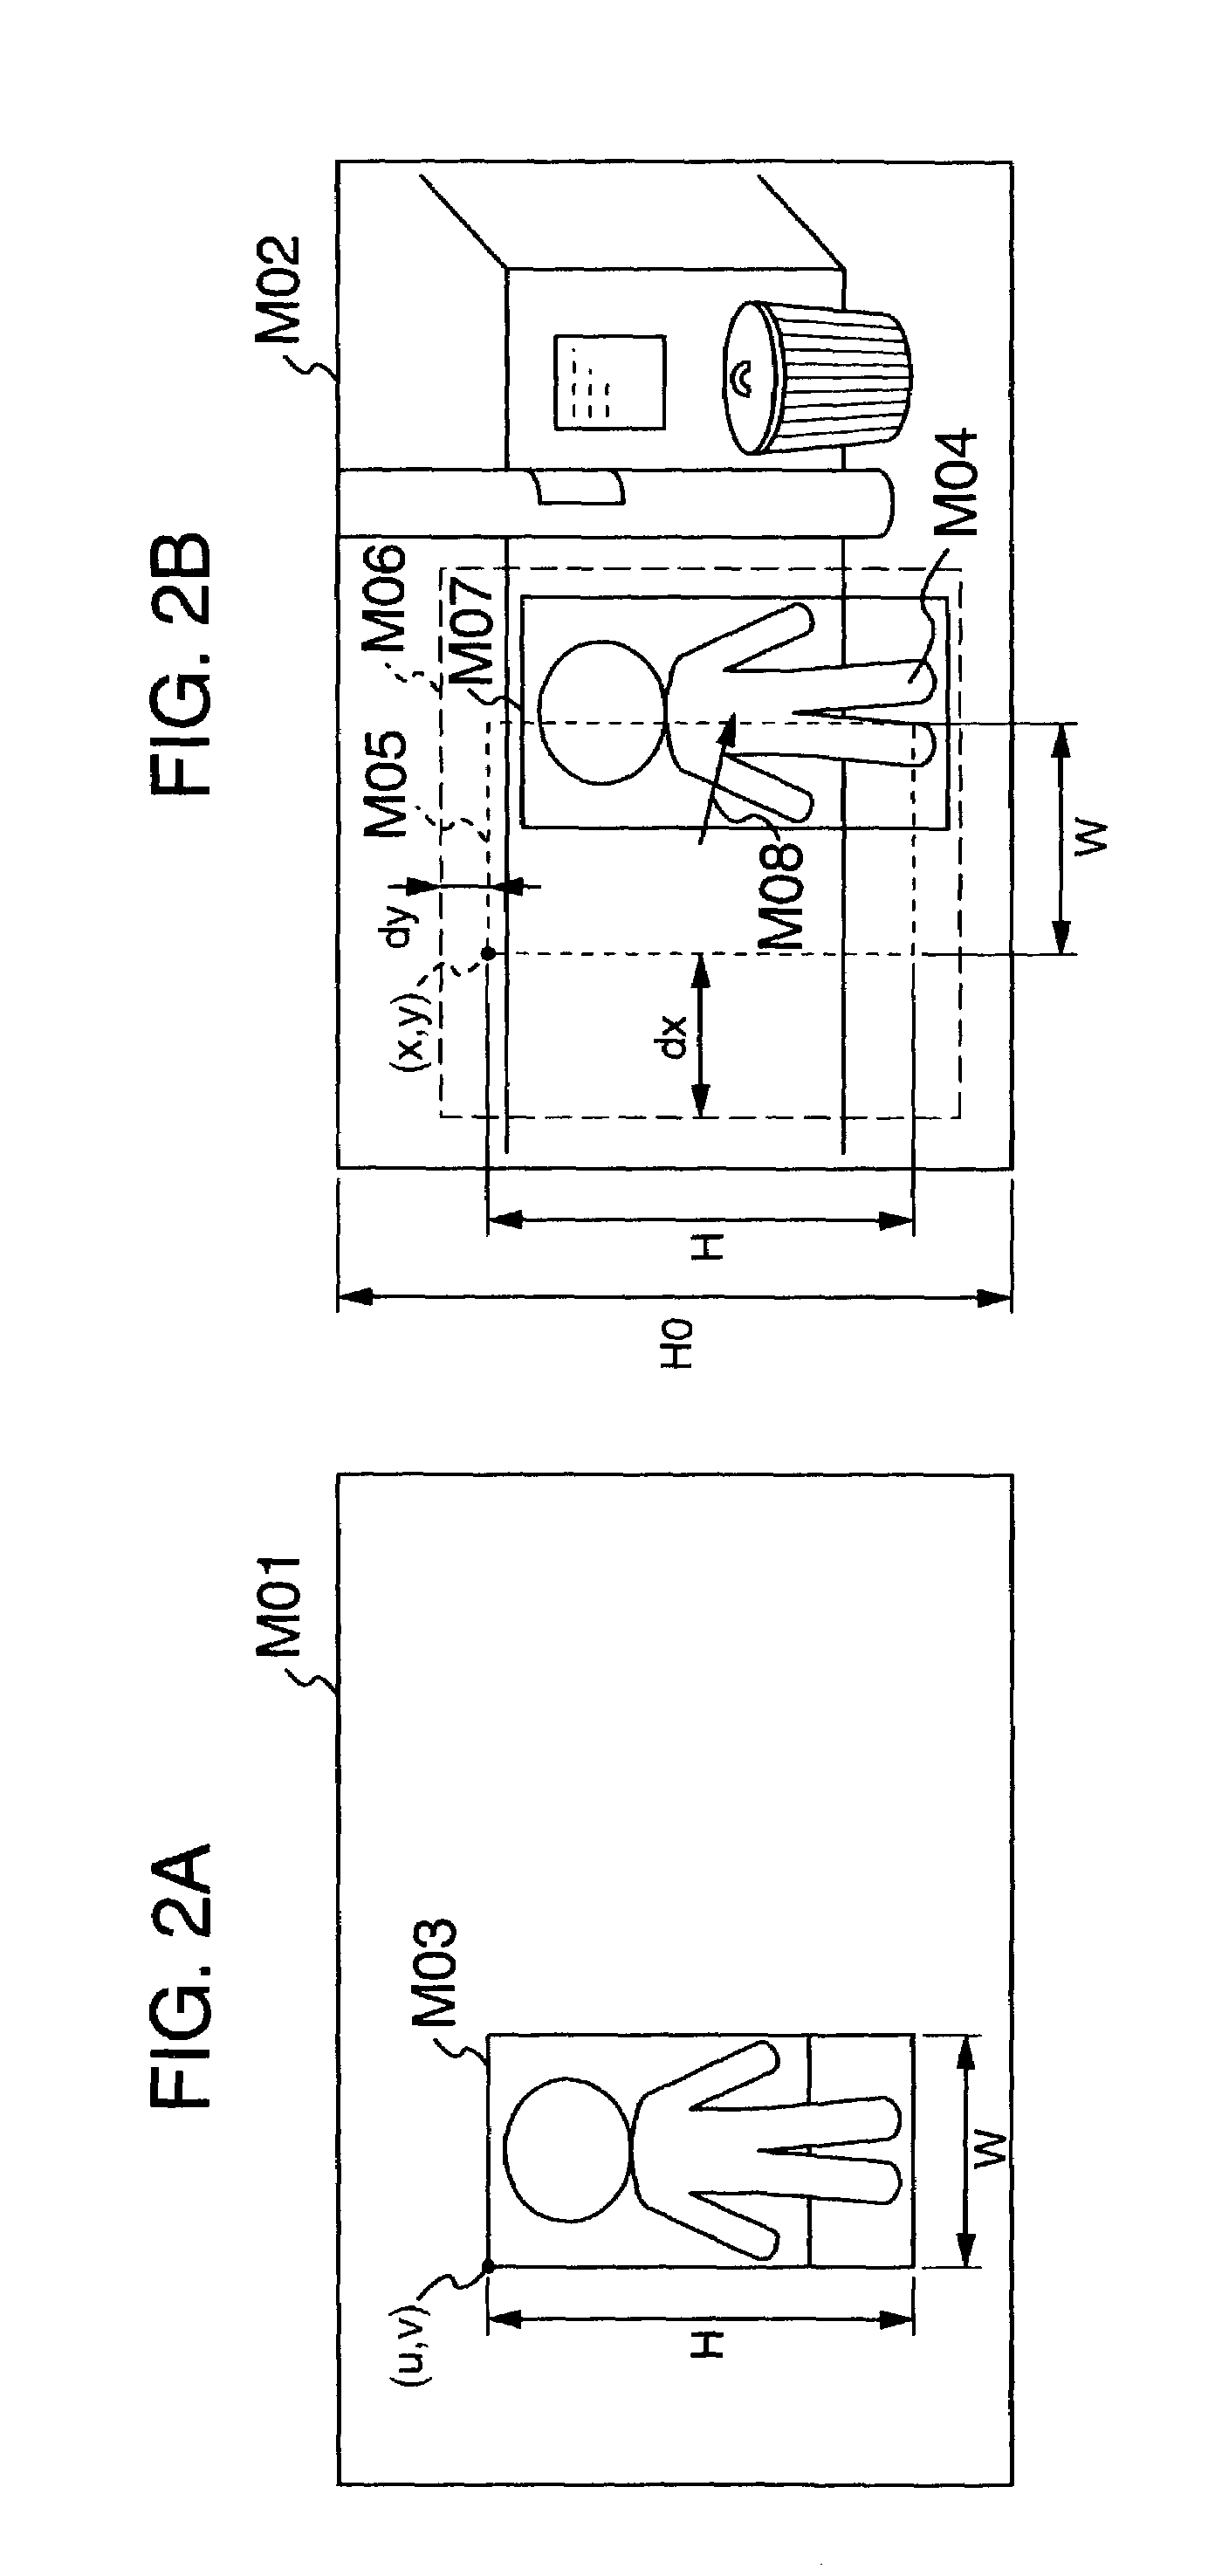 Object tracking method and apparatus using template matching